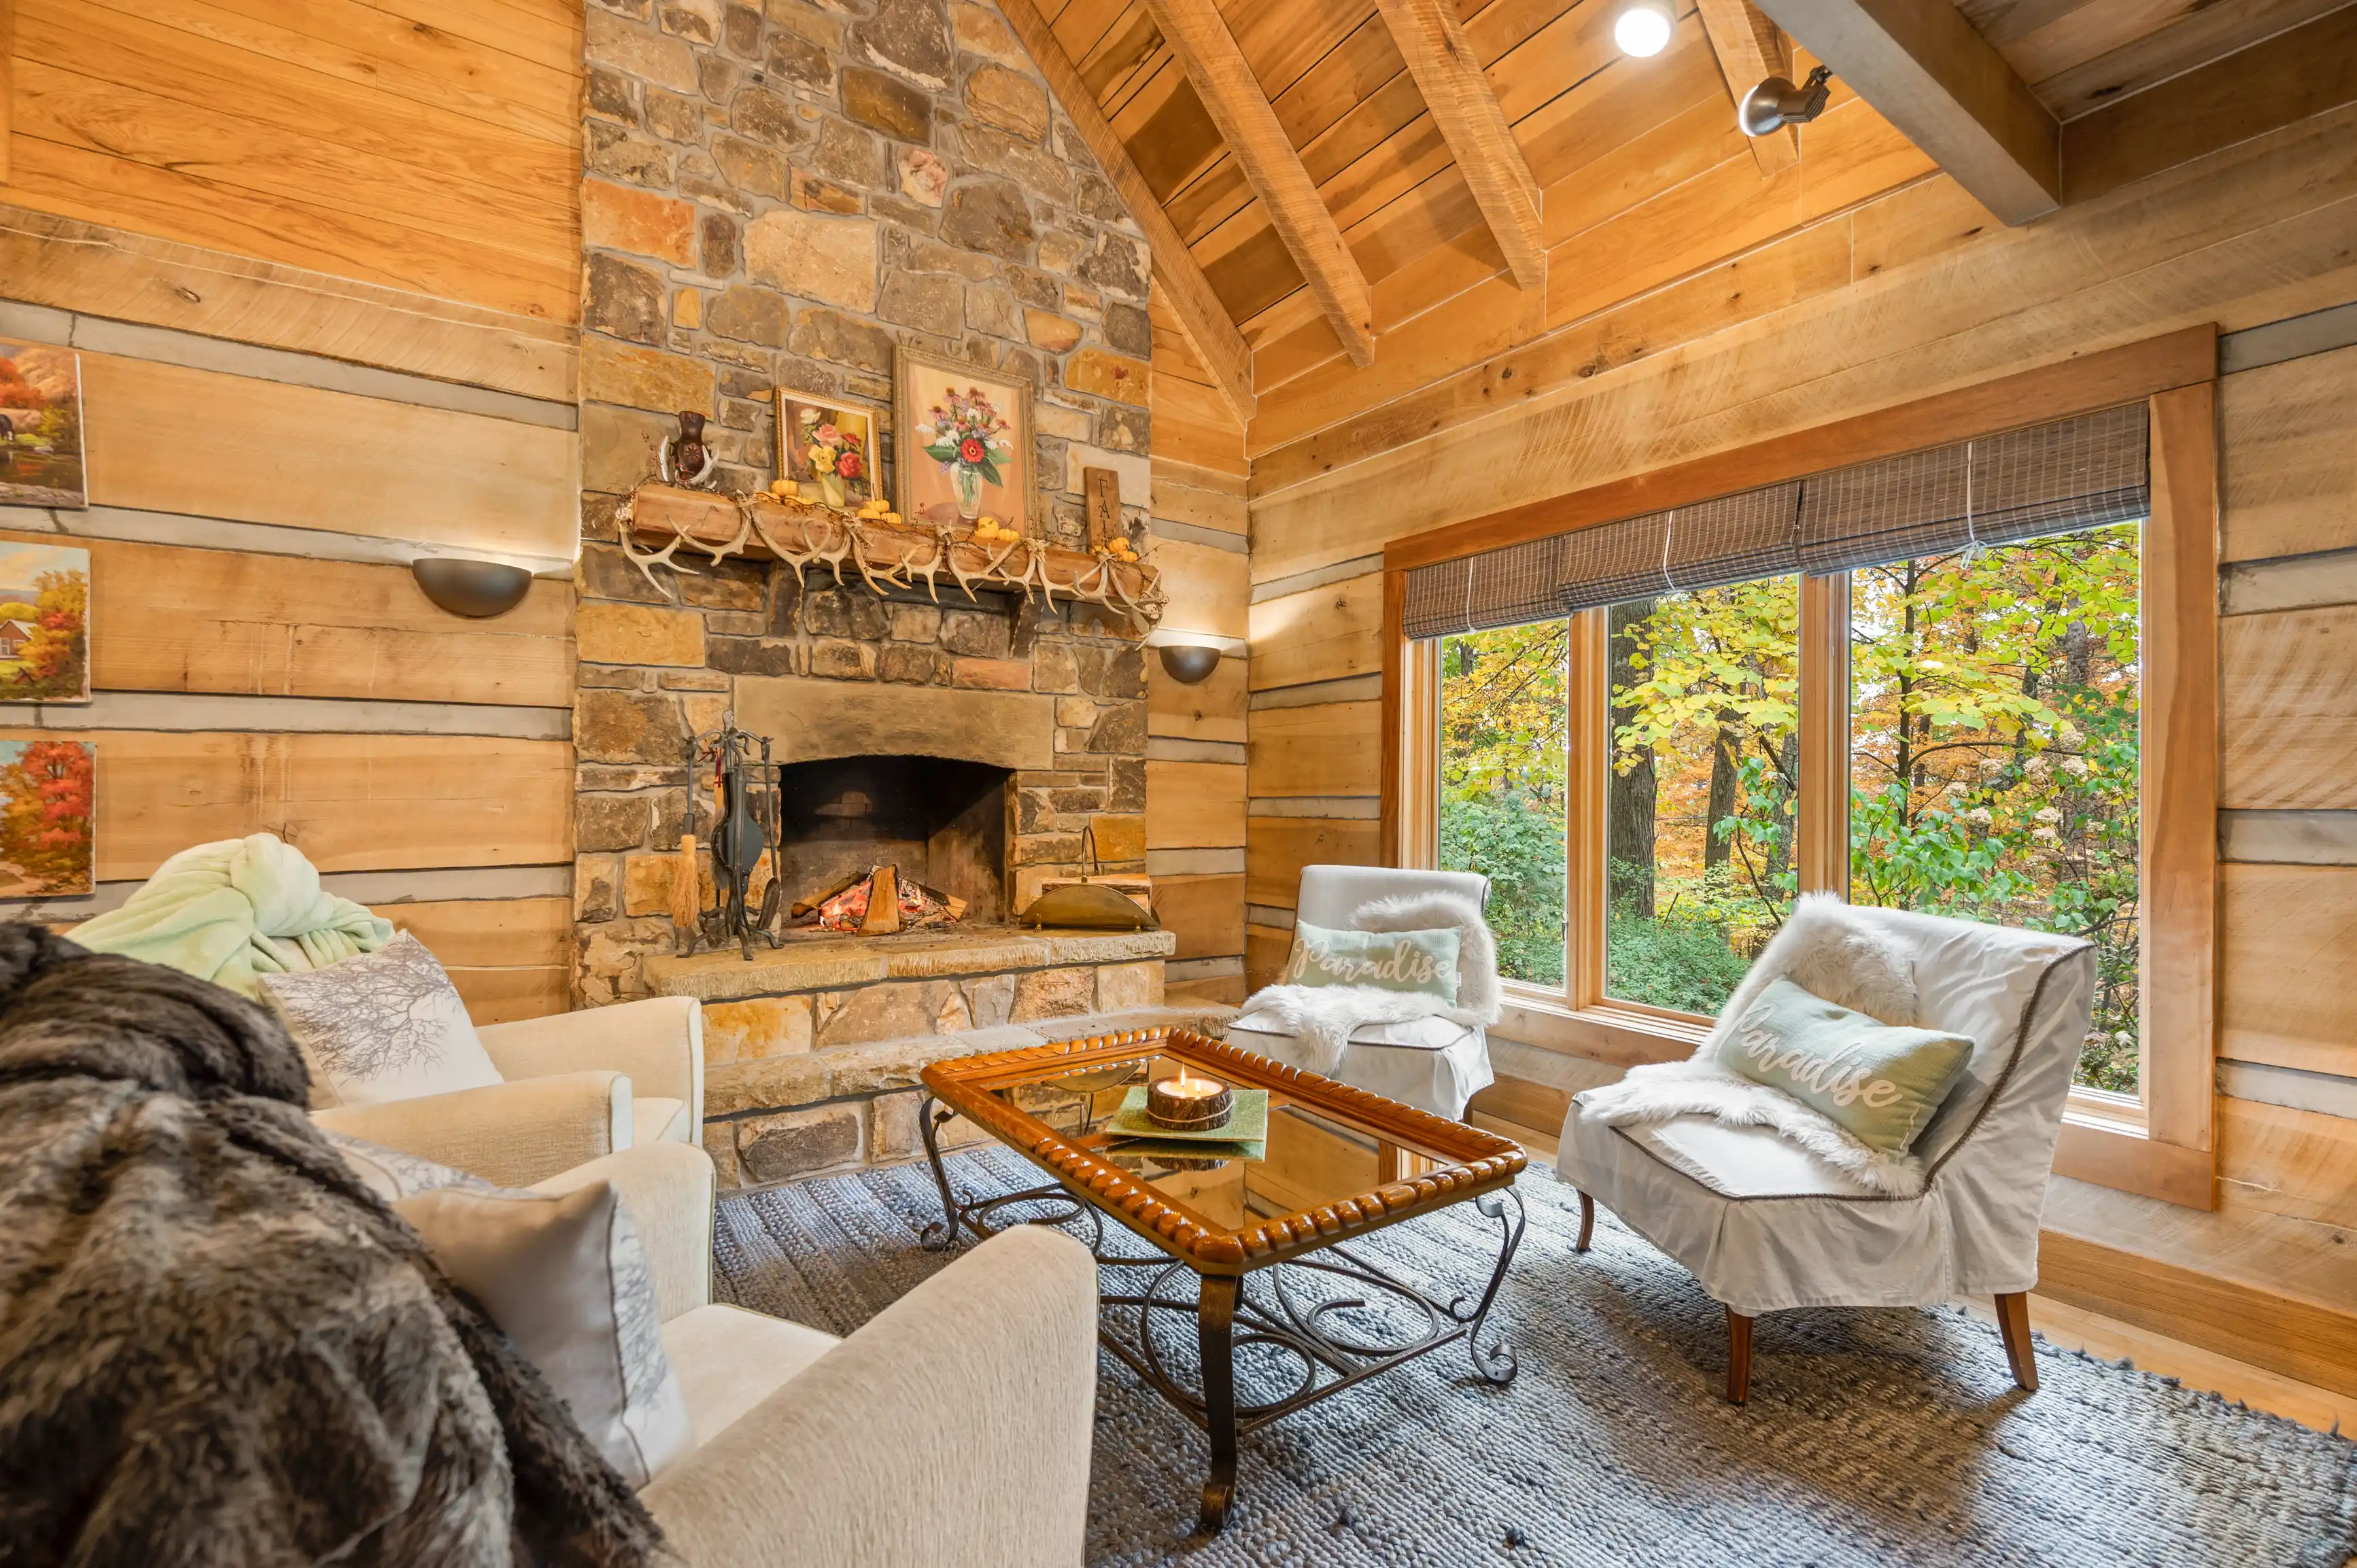 Cozy cabin living room interior with a stone fireplace, wooden walls and ceiling, rustic furniture, and large windows with a forest view.